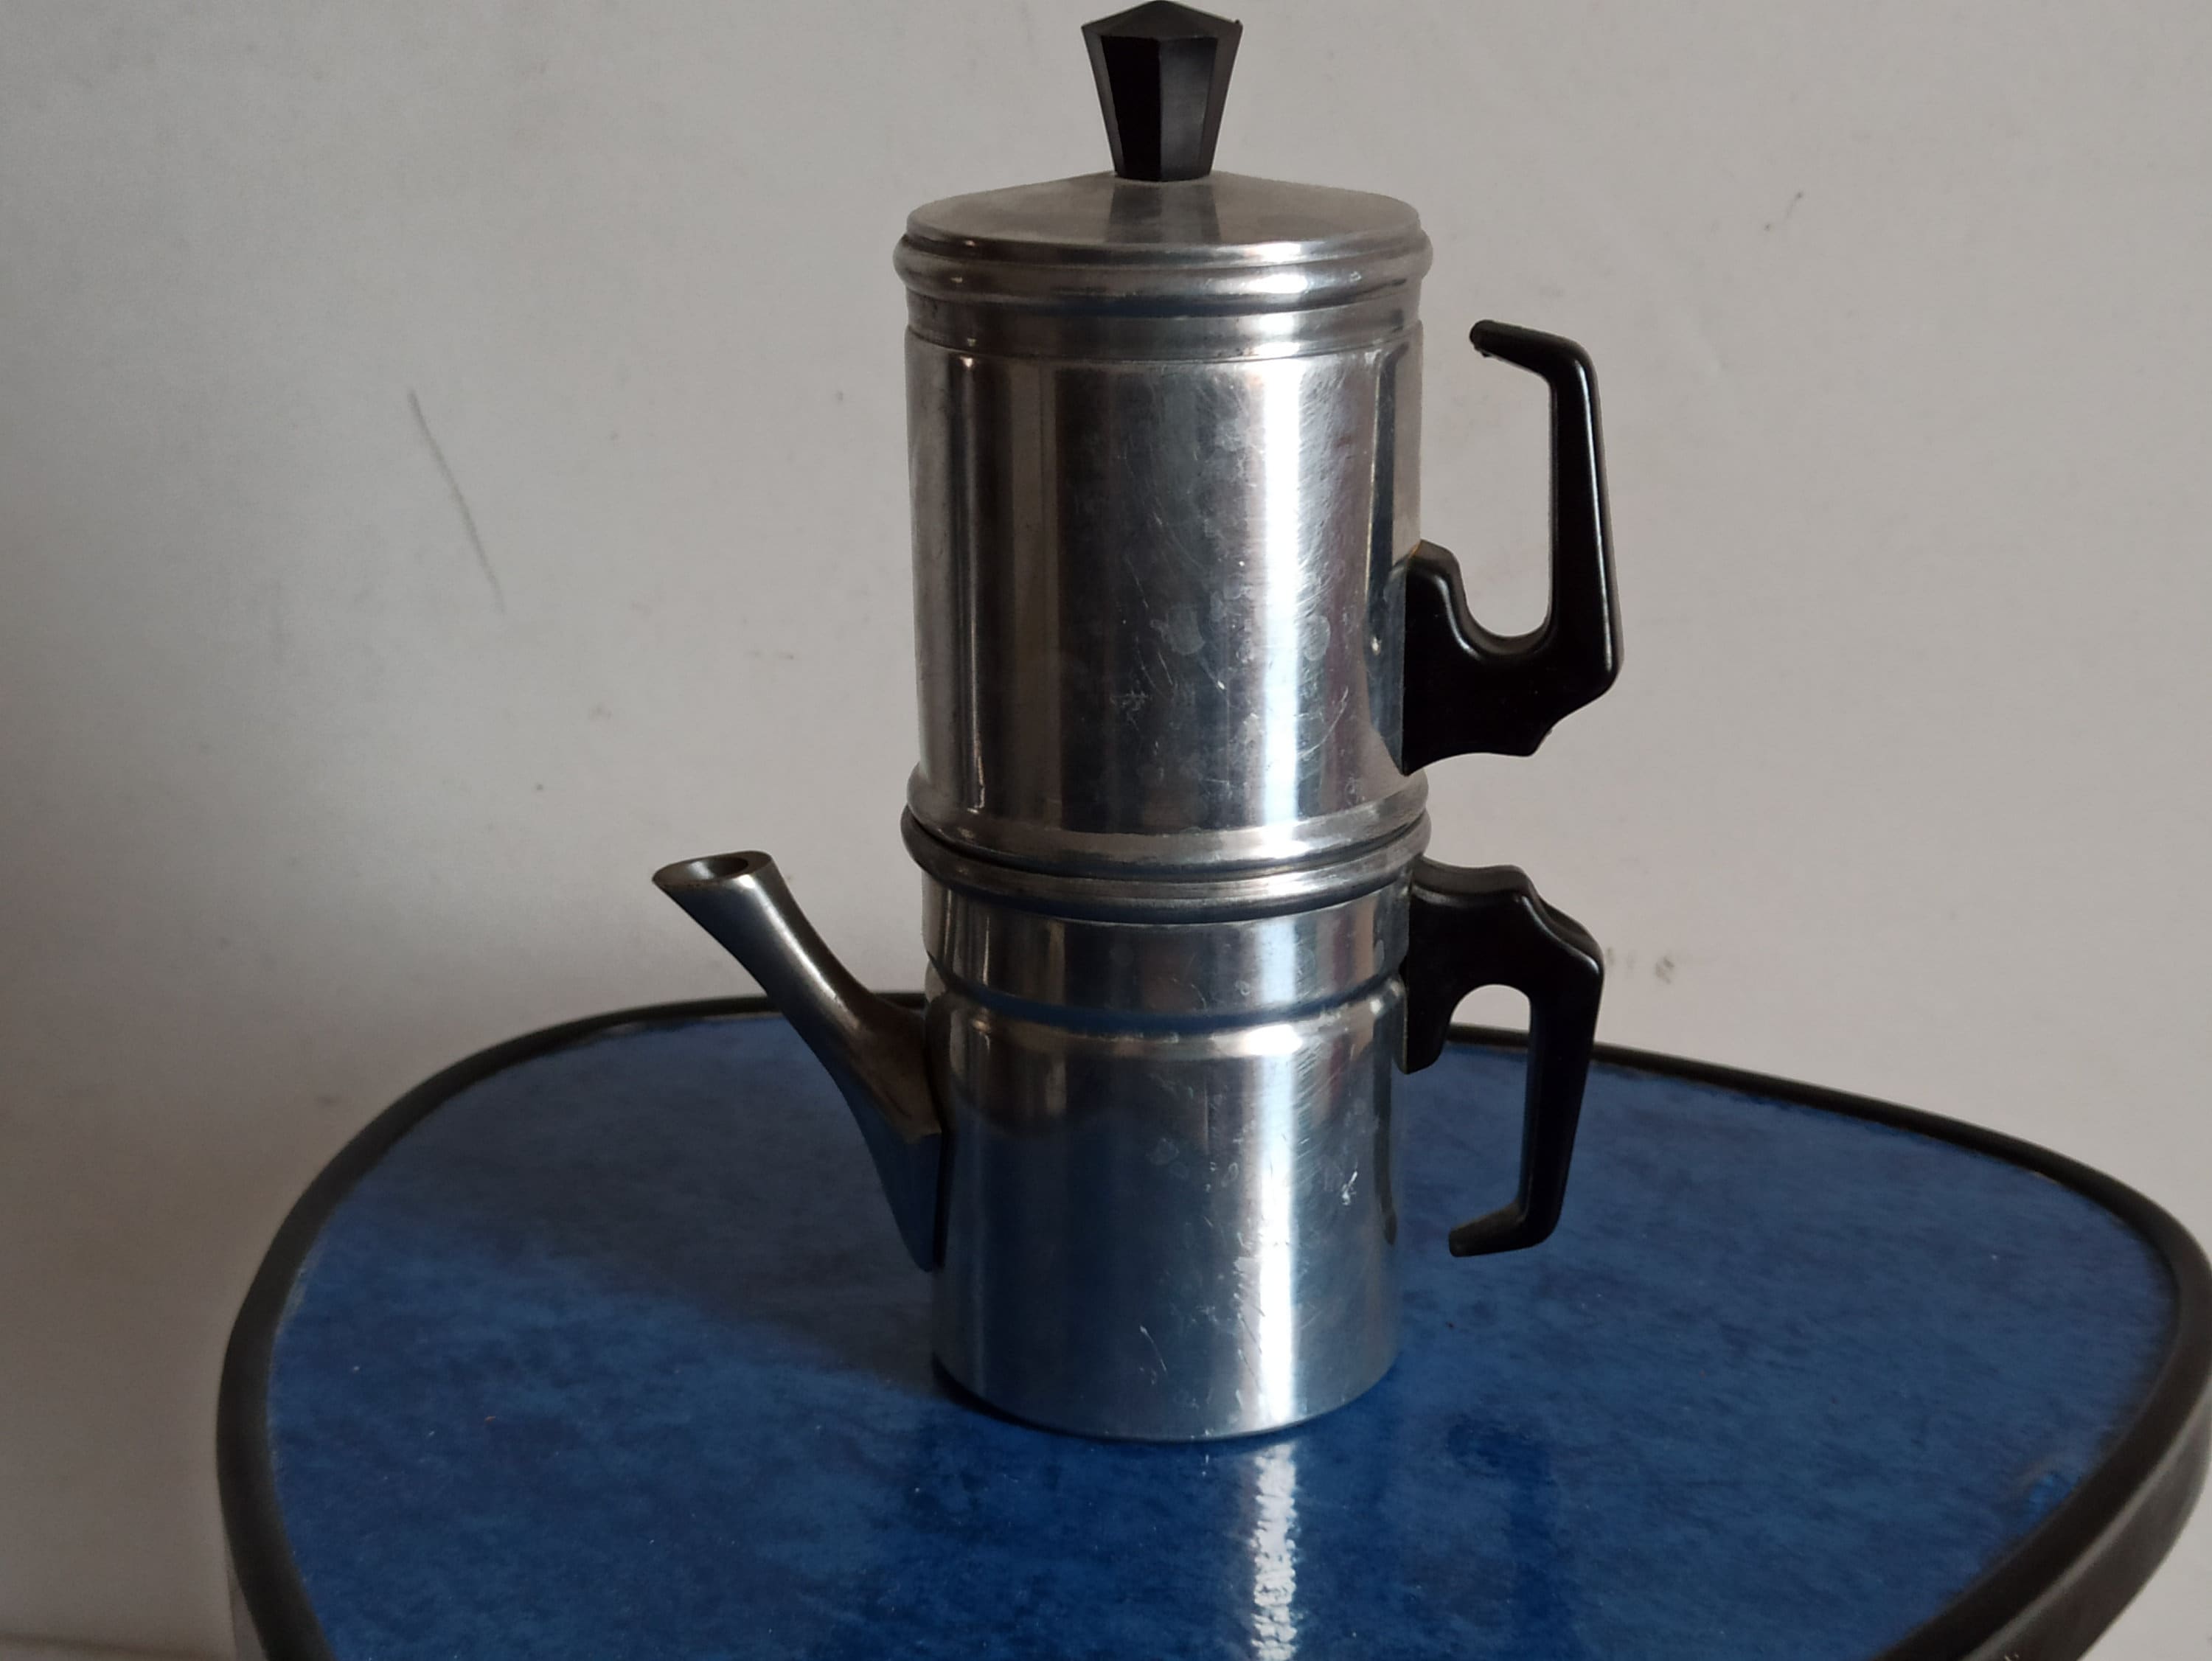 Neapolitan Coffee Maker in Stainless Steel 1 cup - ILSA